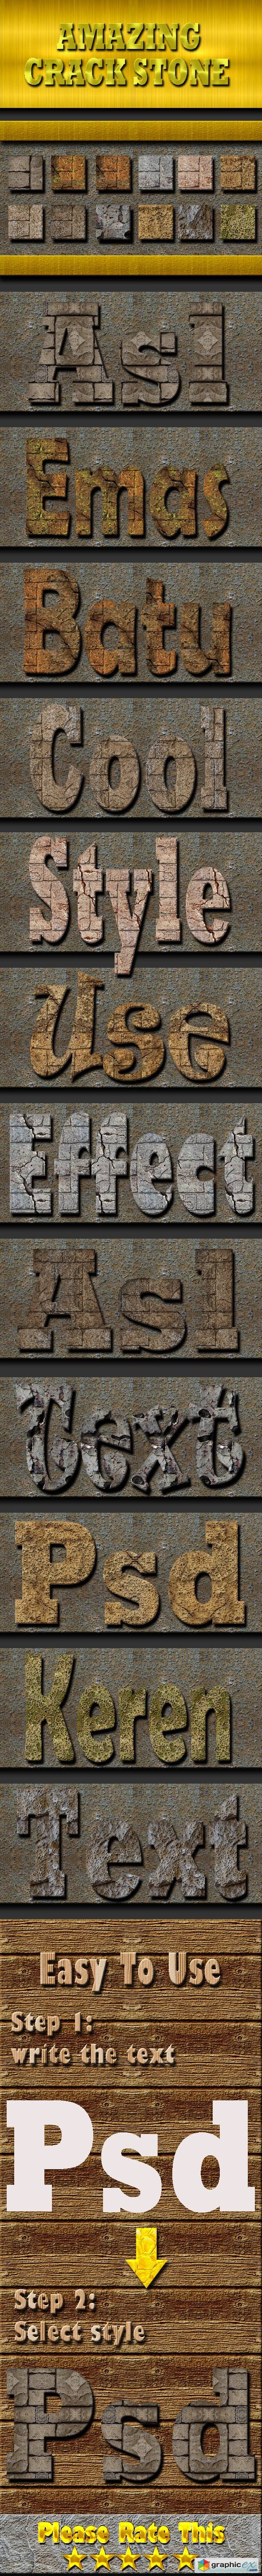 Cracked Stone Text Effect Style